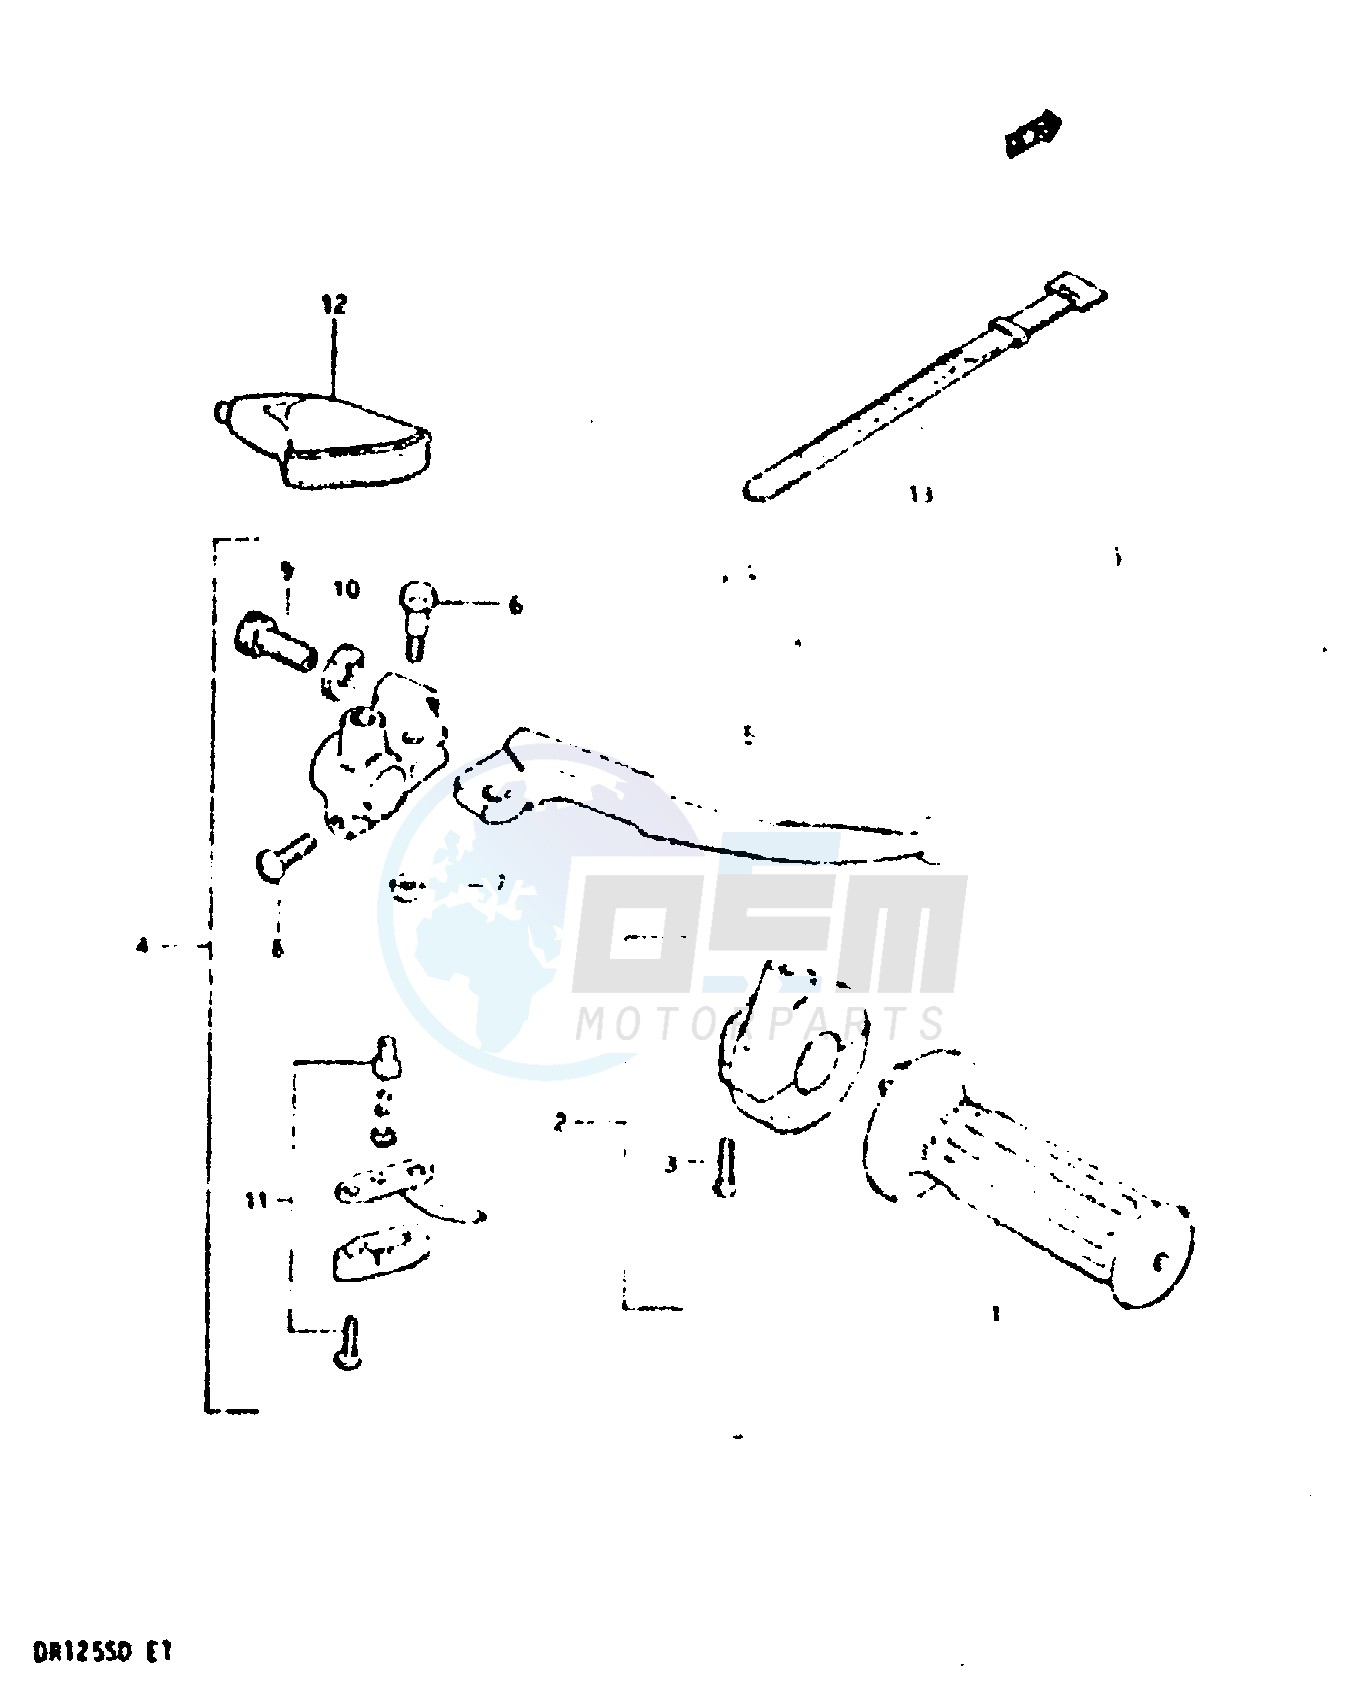 RIGHE HANDLE SWITCH blueprint